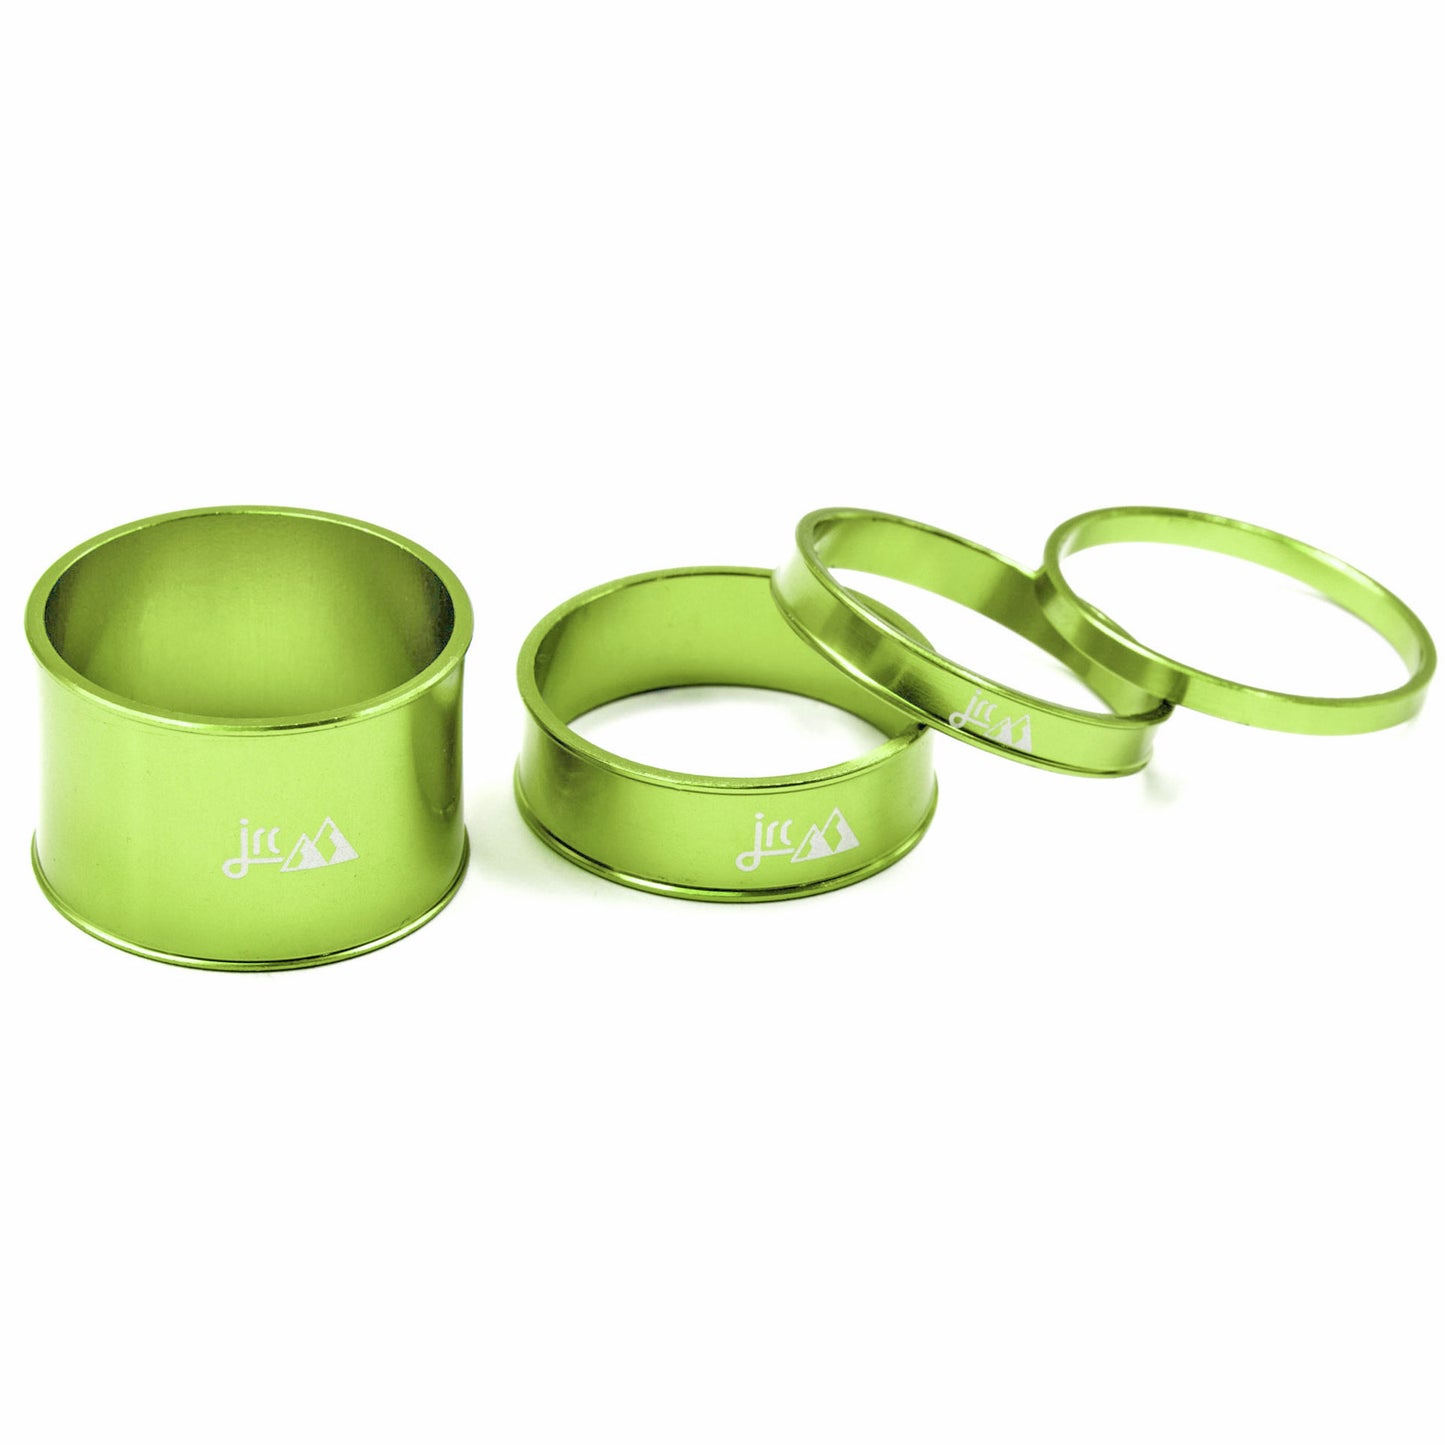 Acid green, lightweight aluminium bicycle headset spacer kit with 4 sizes.